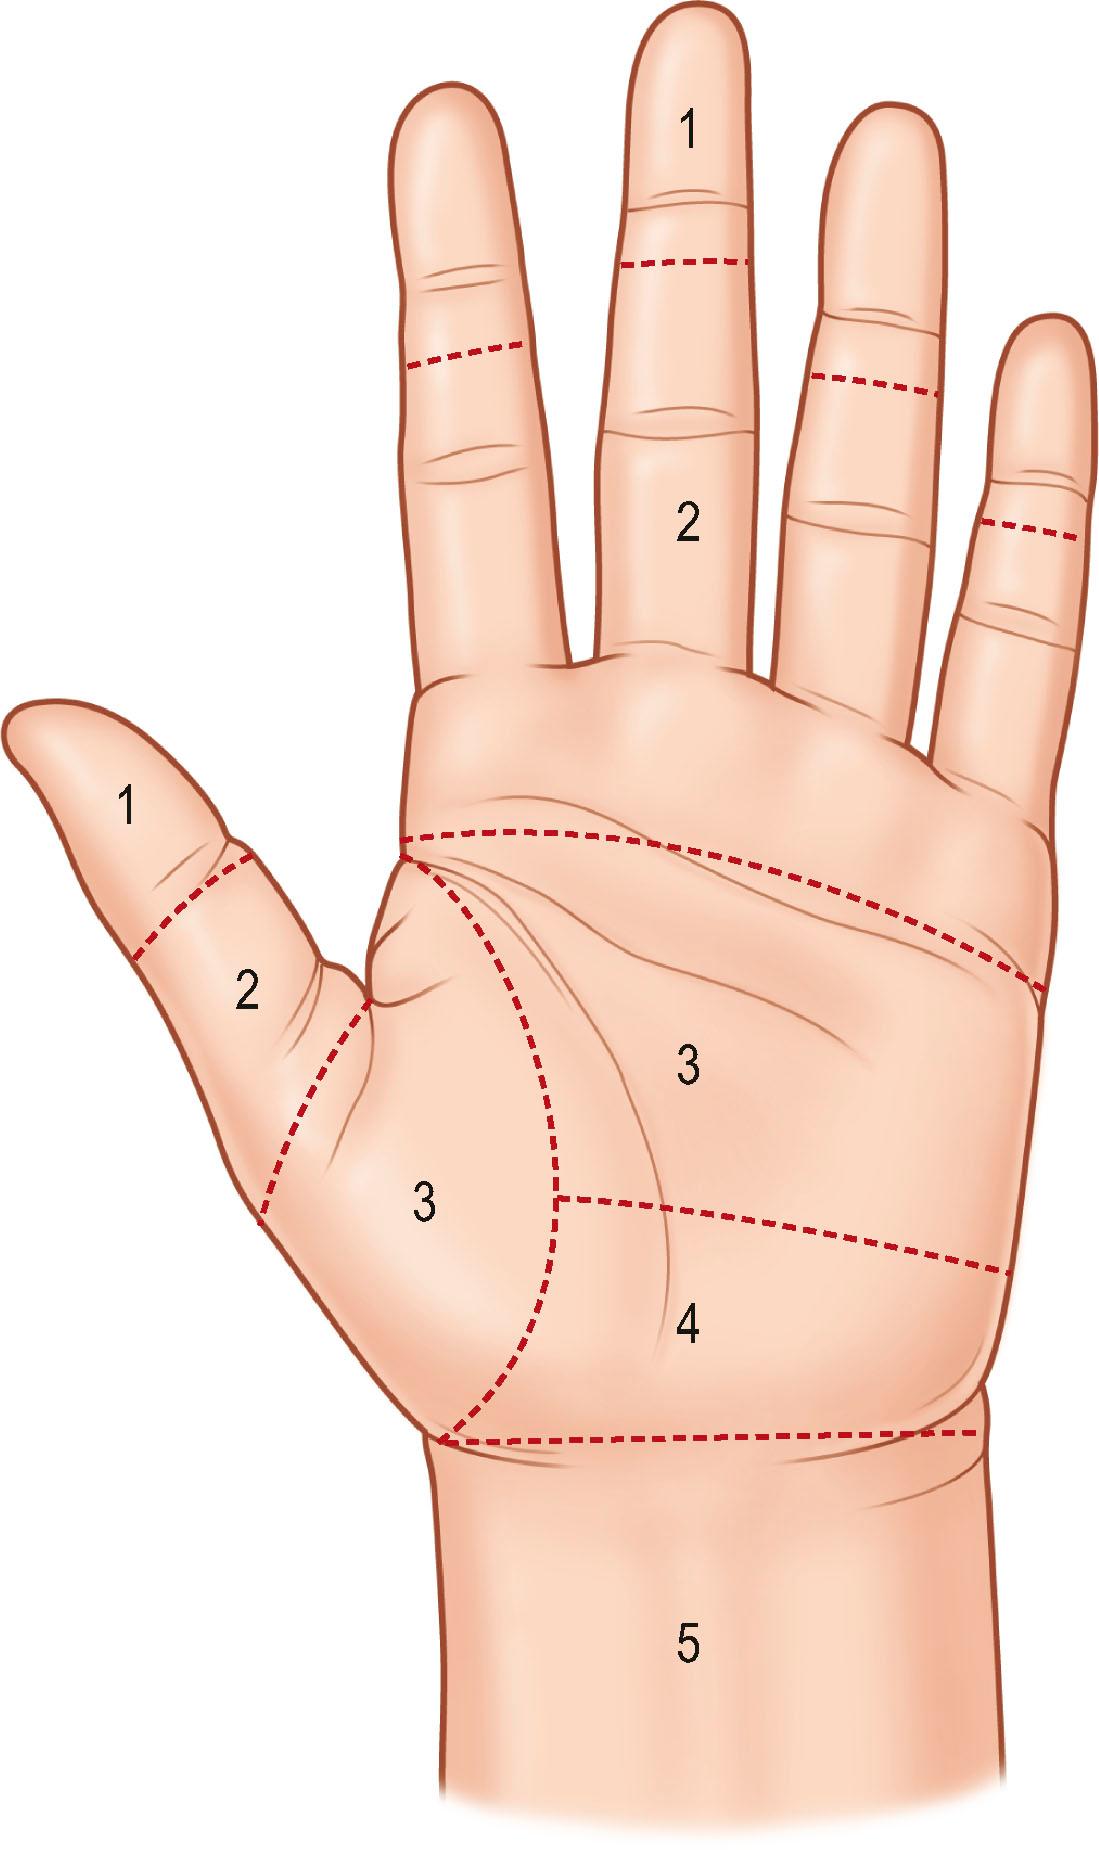 Figure 9.4, Divisions of the flexor tendons into five zones according to anatomical structures of the flexor tendons, presence of the synovial sheath, and the transverse carpal ligament.